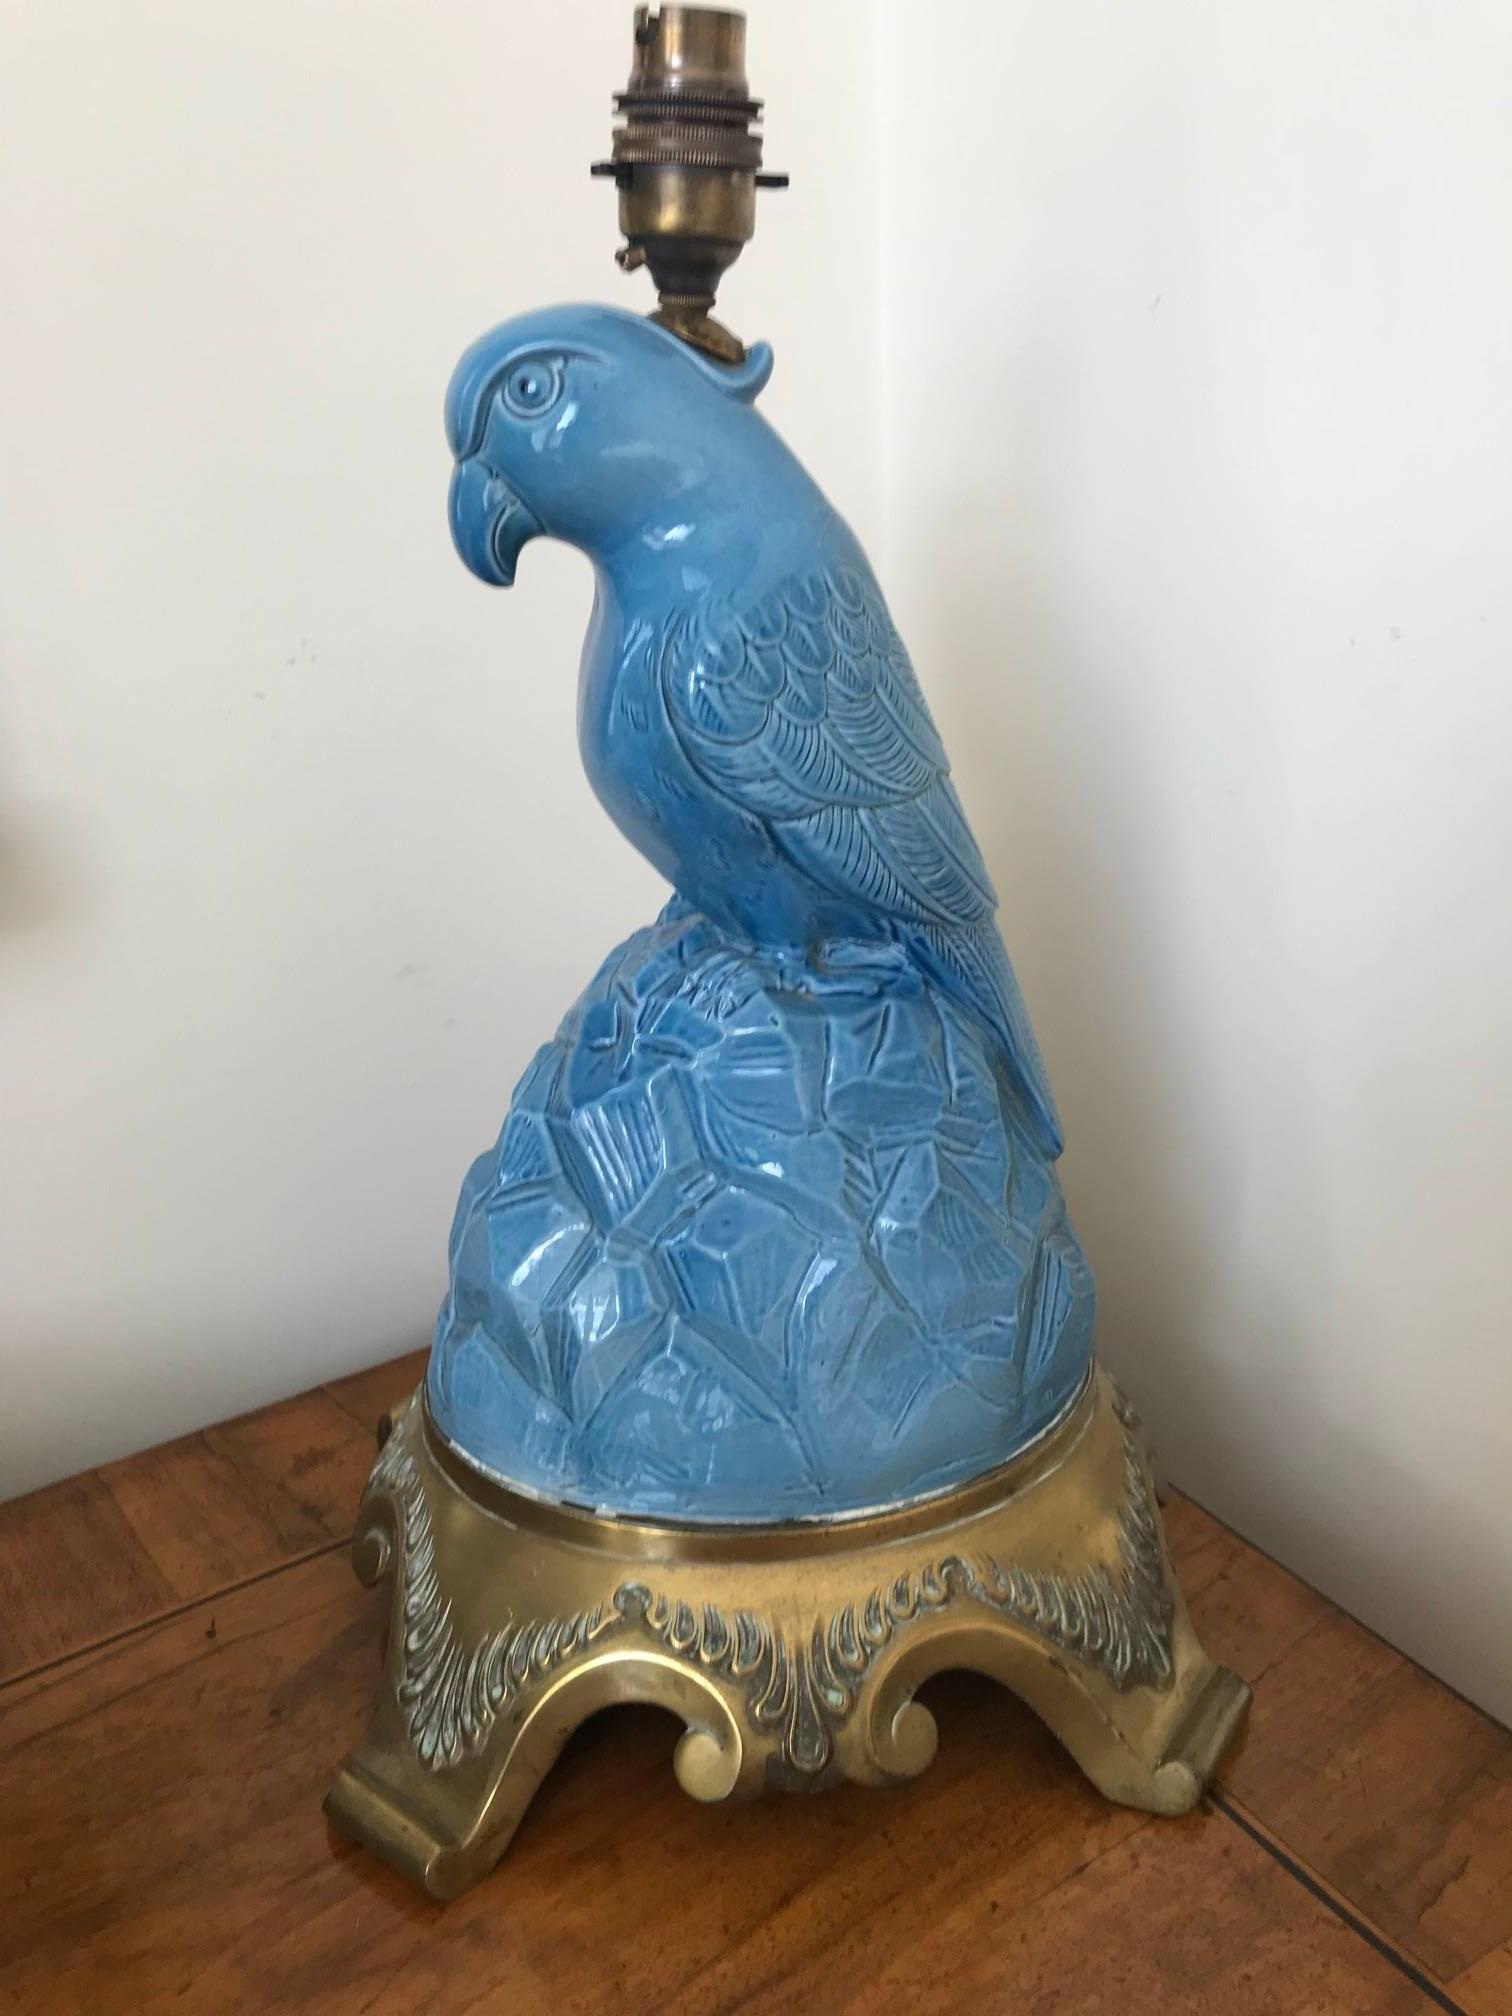 A stunning blue porcelain lamp in the form of parrot mounted on a solid cast bronze base, English, circa 1930s.